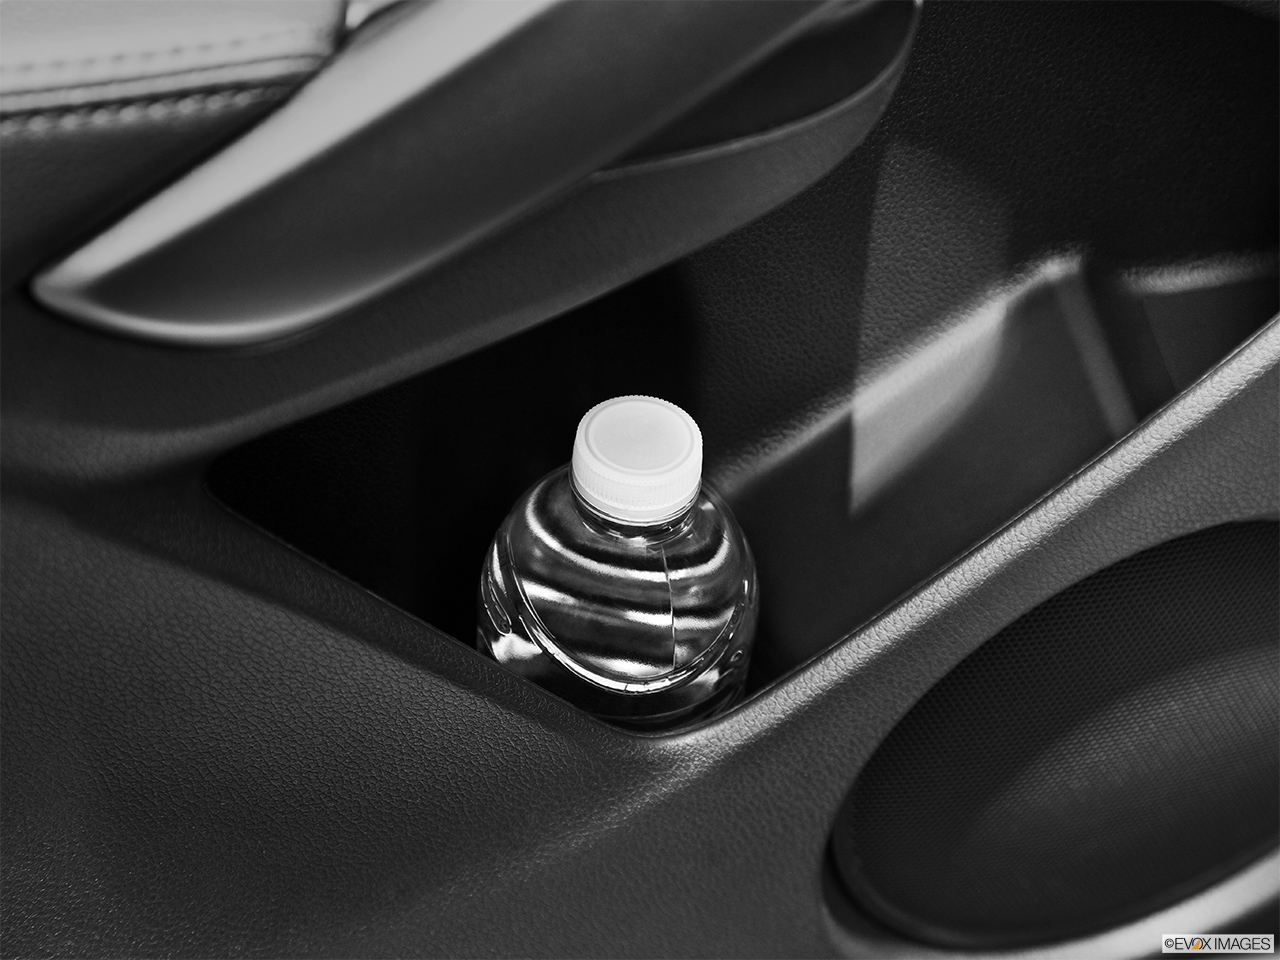 2014 Acura RDX Base Second row side cup holder with coffee prop, or second row door cup holder with water bottle. 